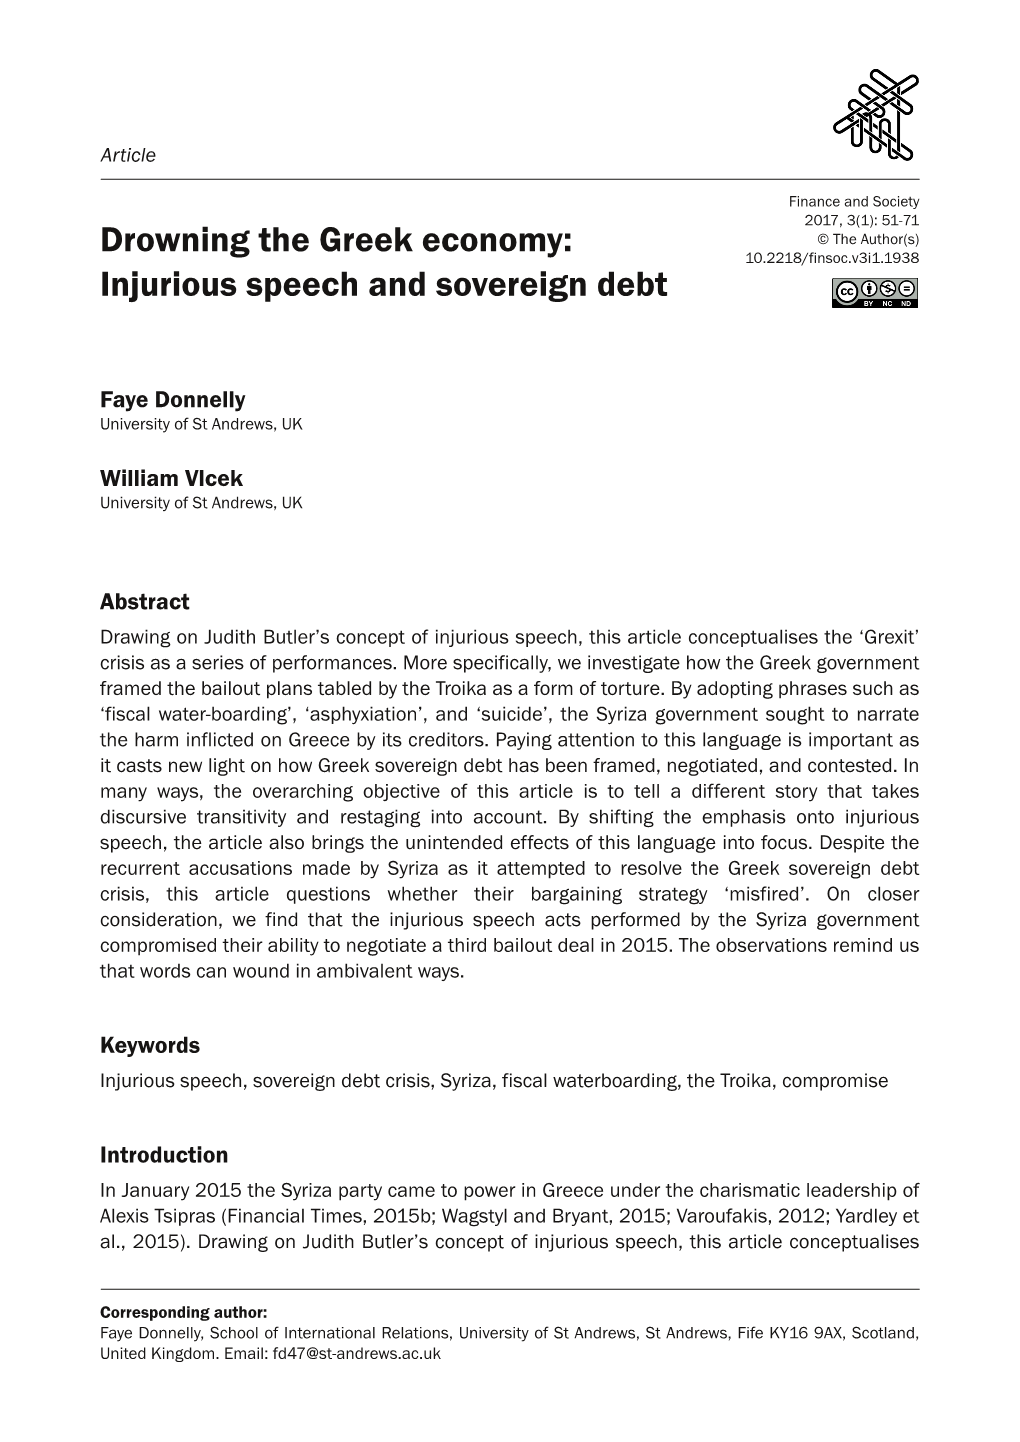 Drowning the Greek Economy: Injurious Speech and Sovereign Debt